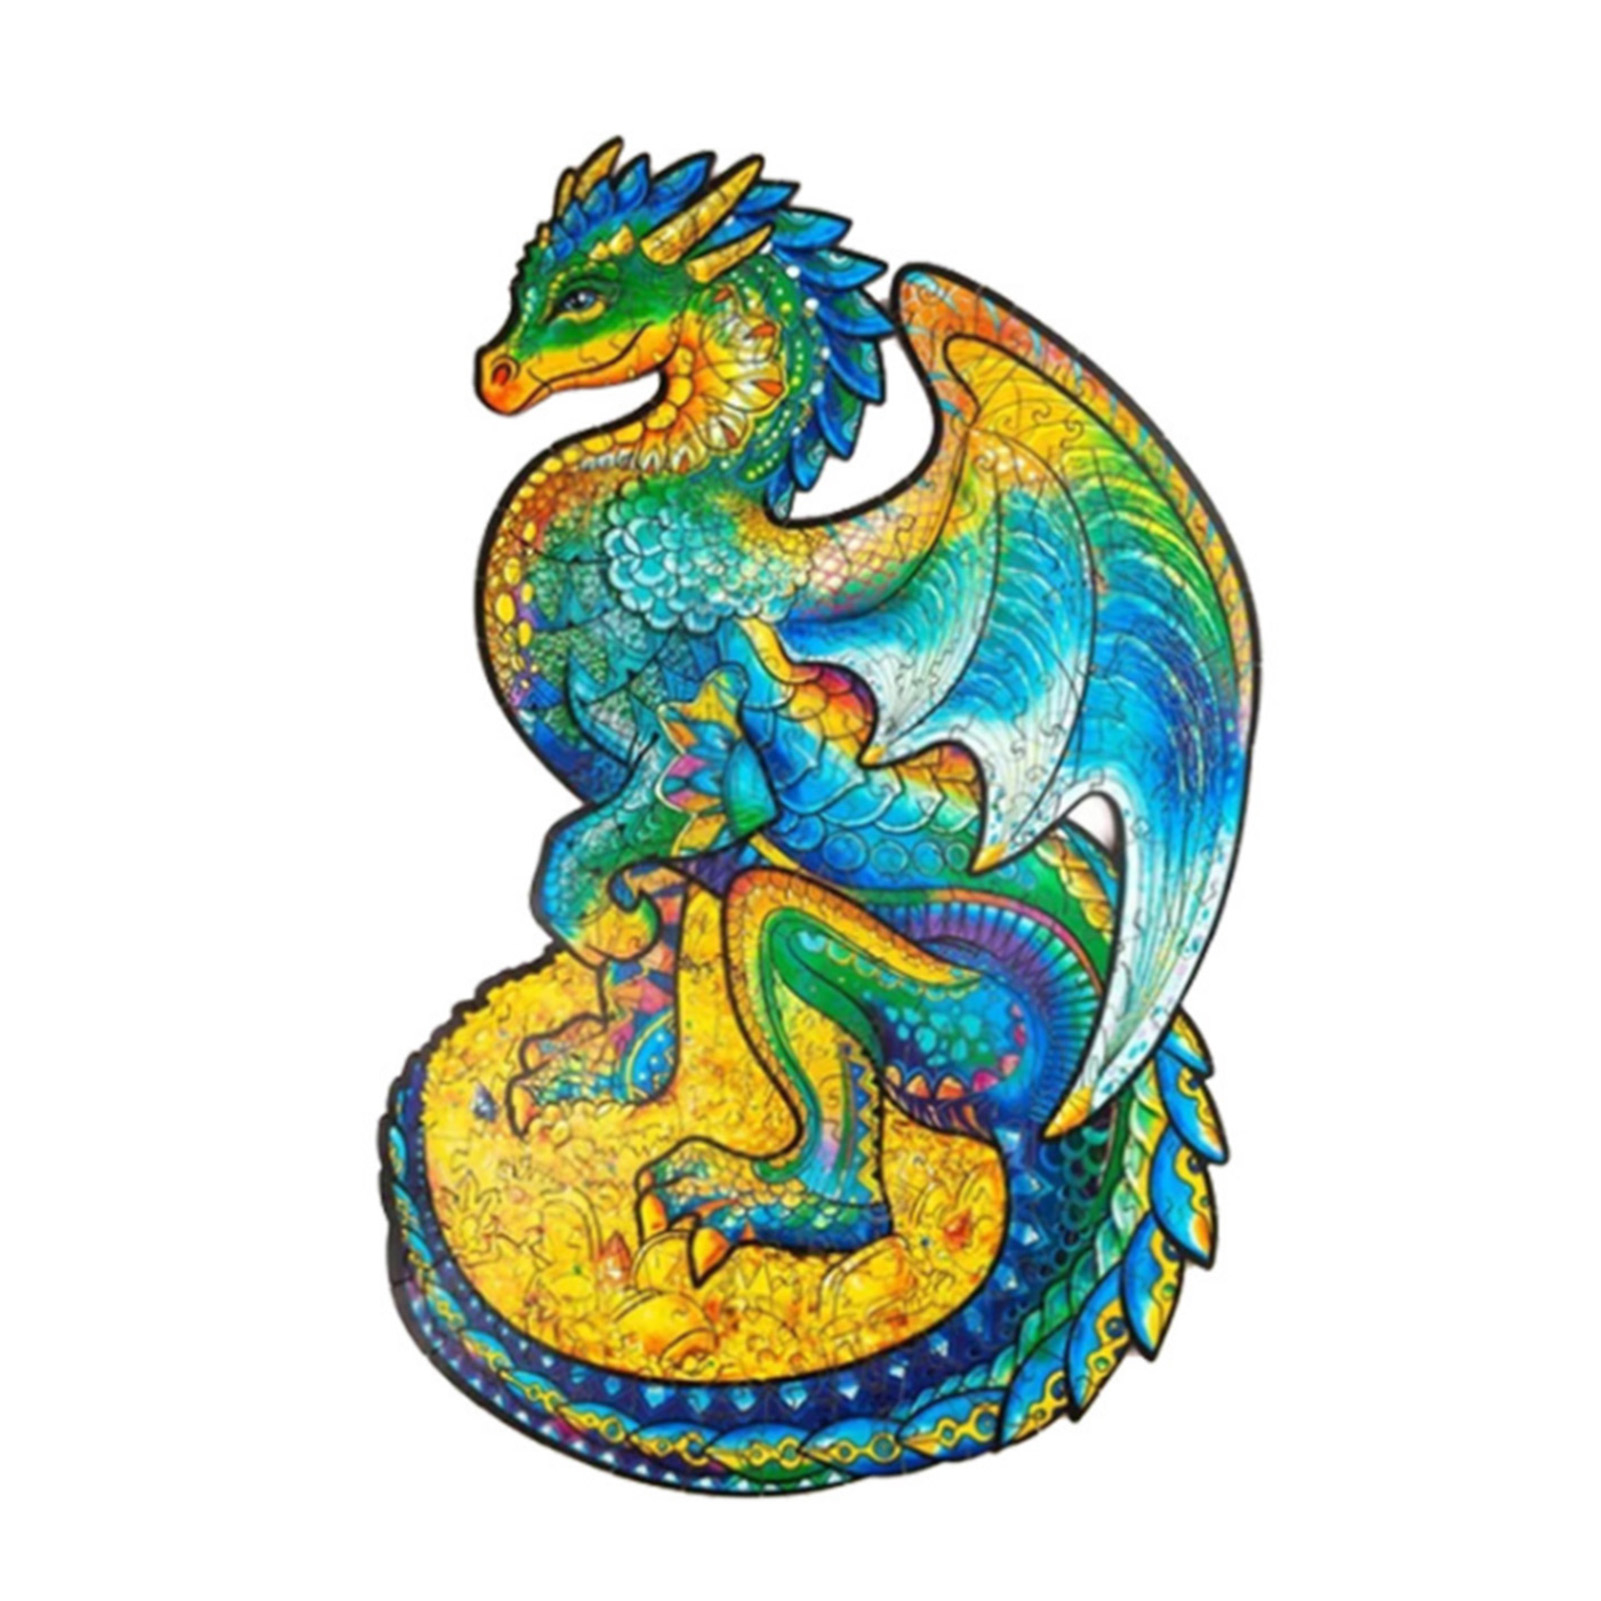 Wooden Animal Puzzle Animal-shaped Flying Dragon Jigsaw Puzzle For Adults Kids Educational Toy For Kids